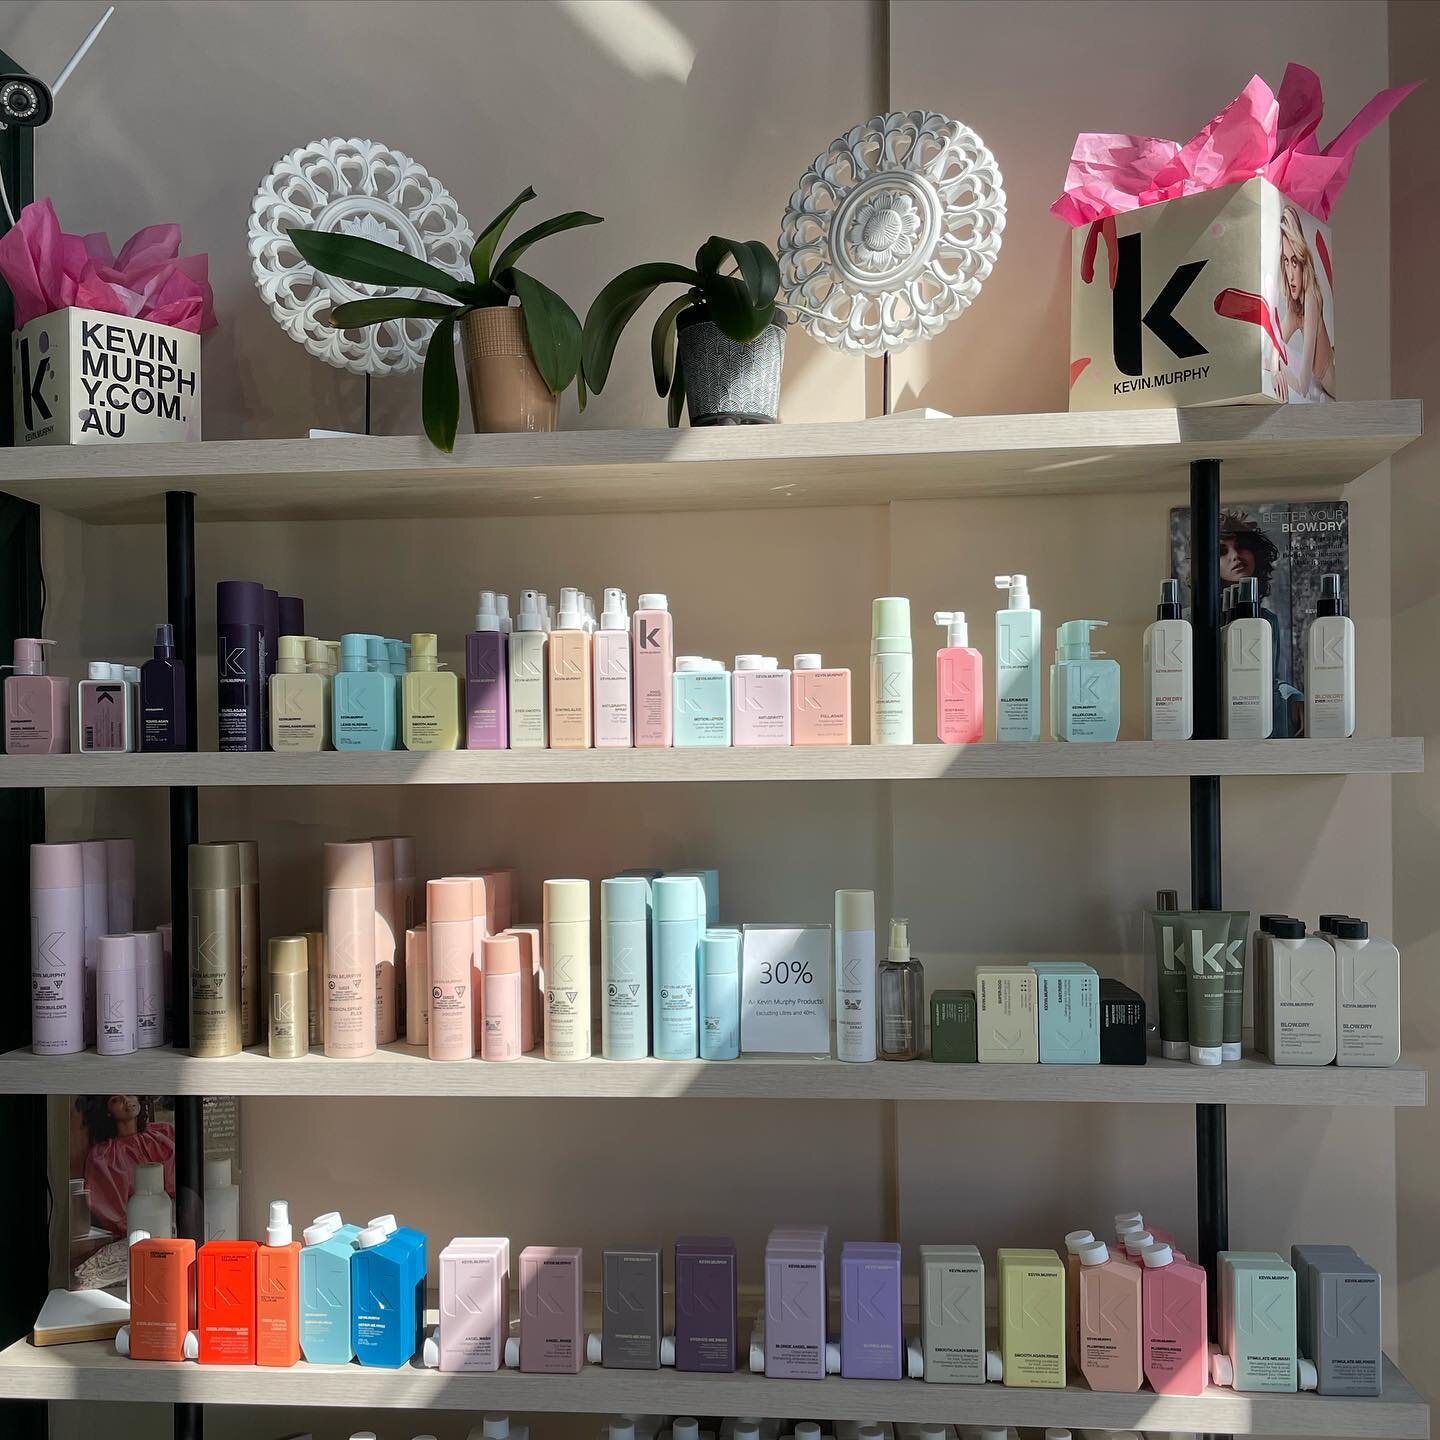 30% off all Kevin Murphy products! Treat yourself or treat a friend, just in time for Mothers Day! ✨🥰🤩 *Excluding litres and 40mL*